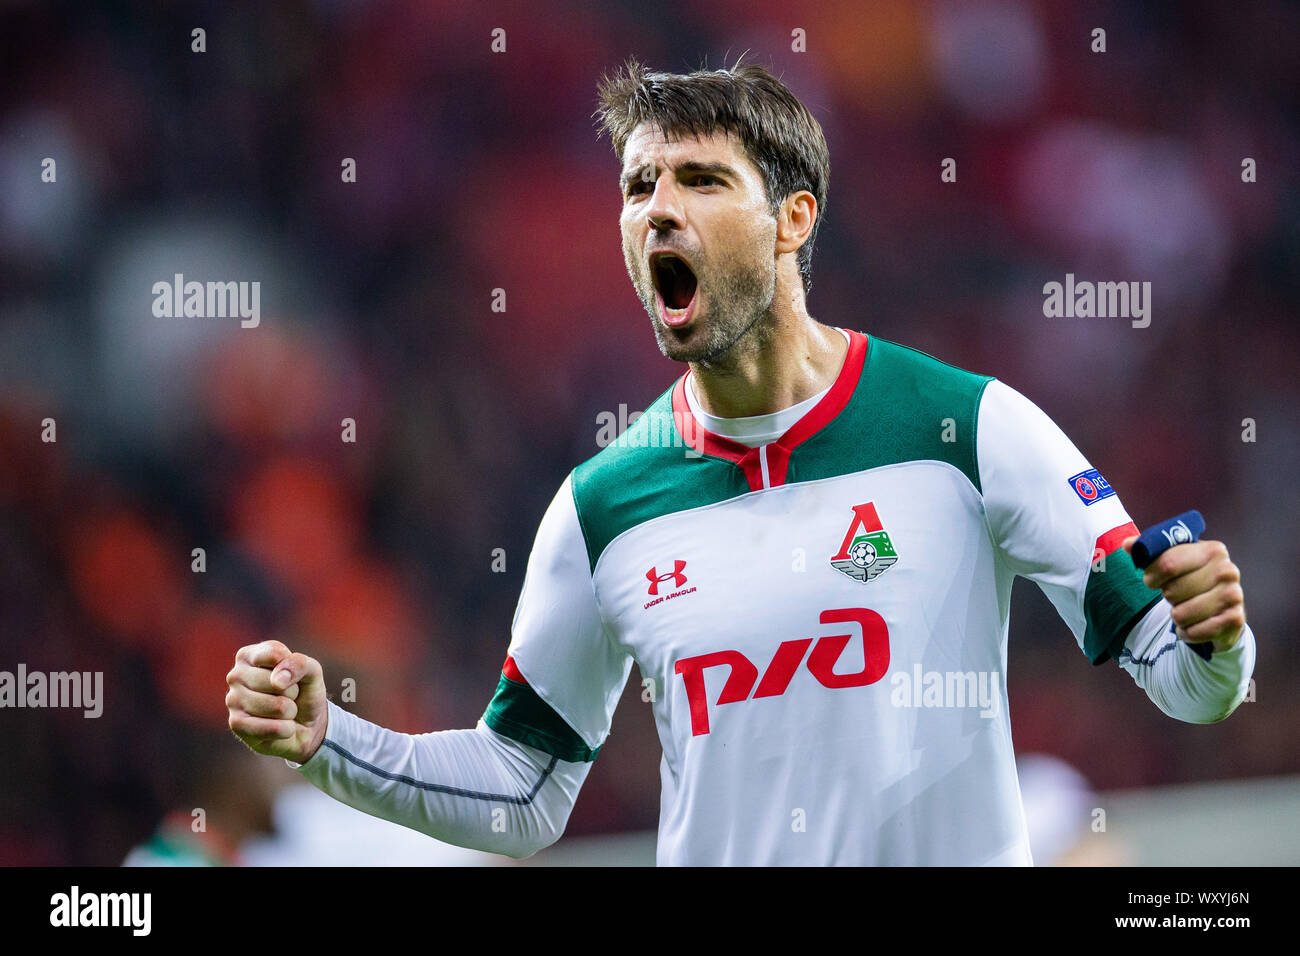 Leverkusen, Germany. 18th Sep, 2019. Soccer: Champions League, Bayer Leverkusen - locomotive Moscow, group stage, group D, 1st matchday in the BayArena. Moscow's Vedran Corluka is happy after the game. Credit: Rolf Vennenbernd/dpa/Alamy Live News Stock Photo